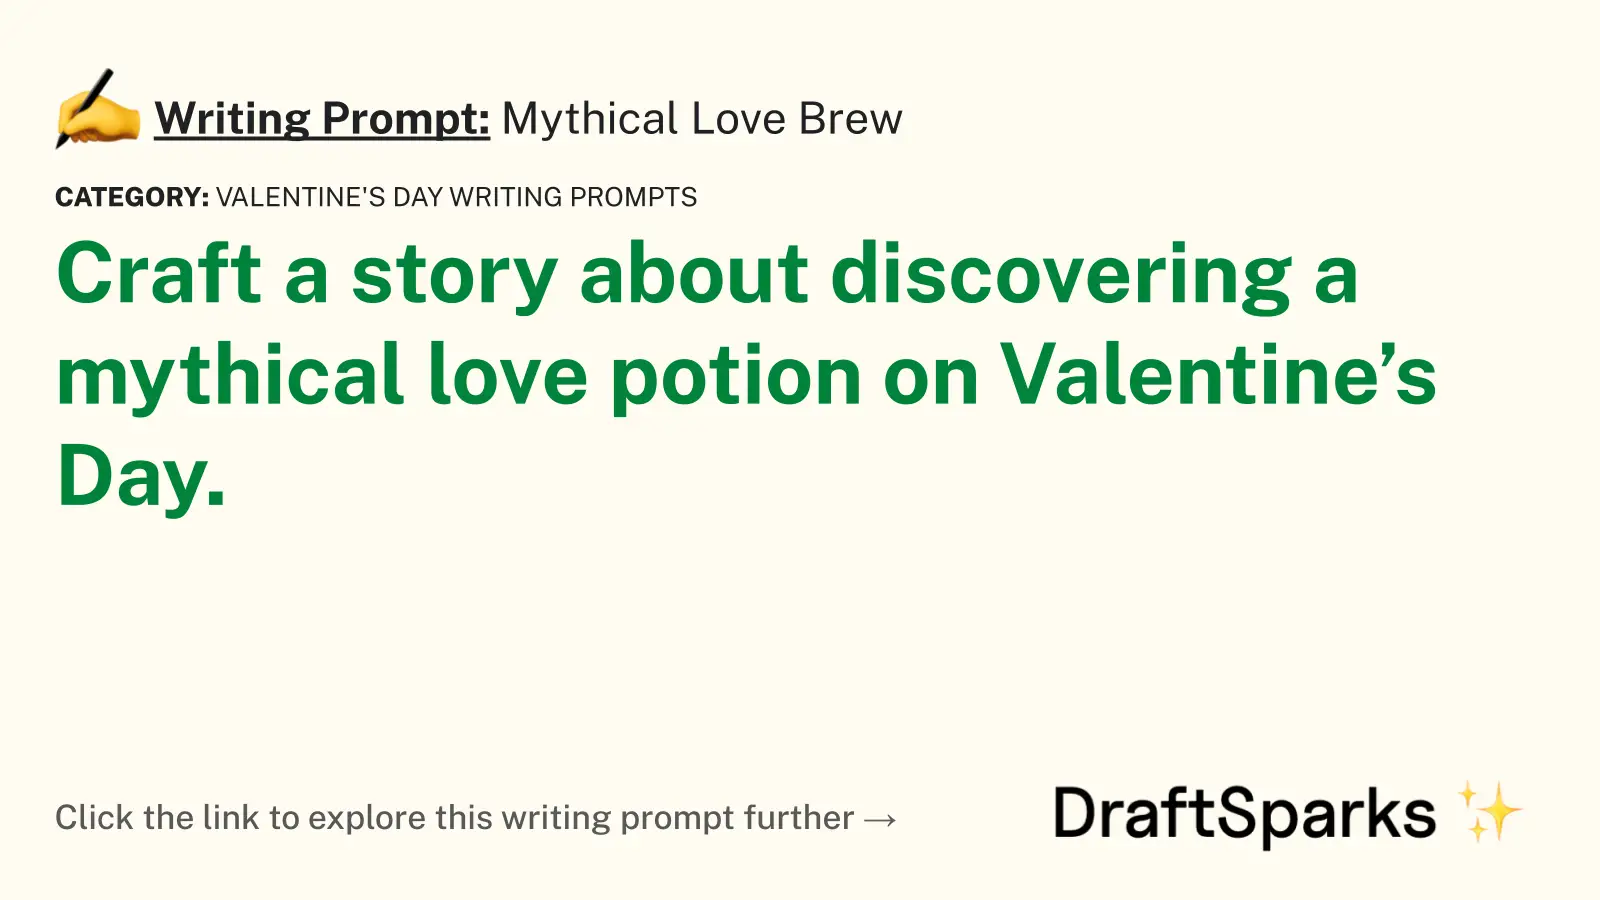 Mythical Love Brew